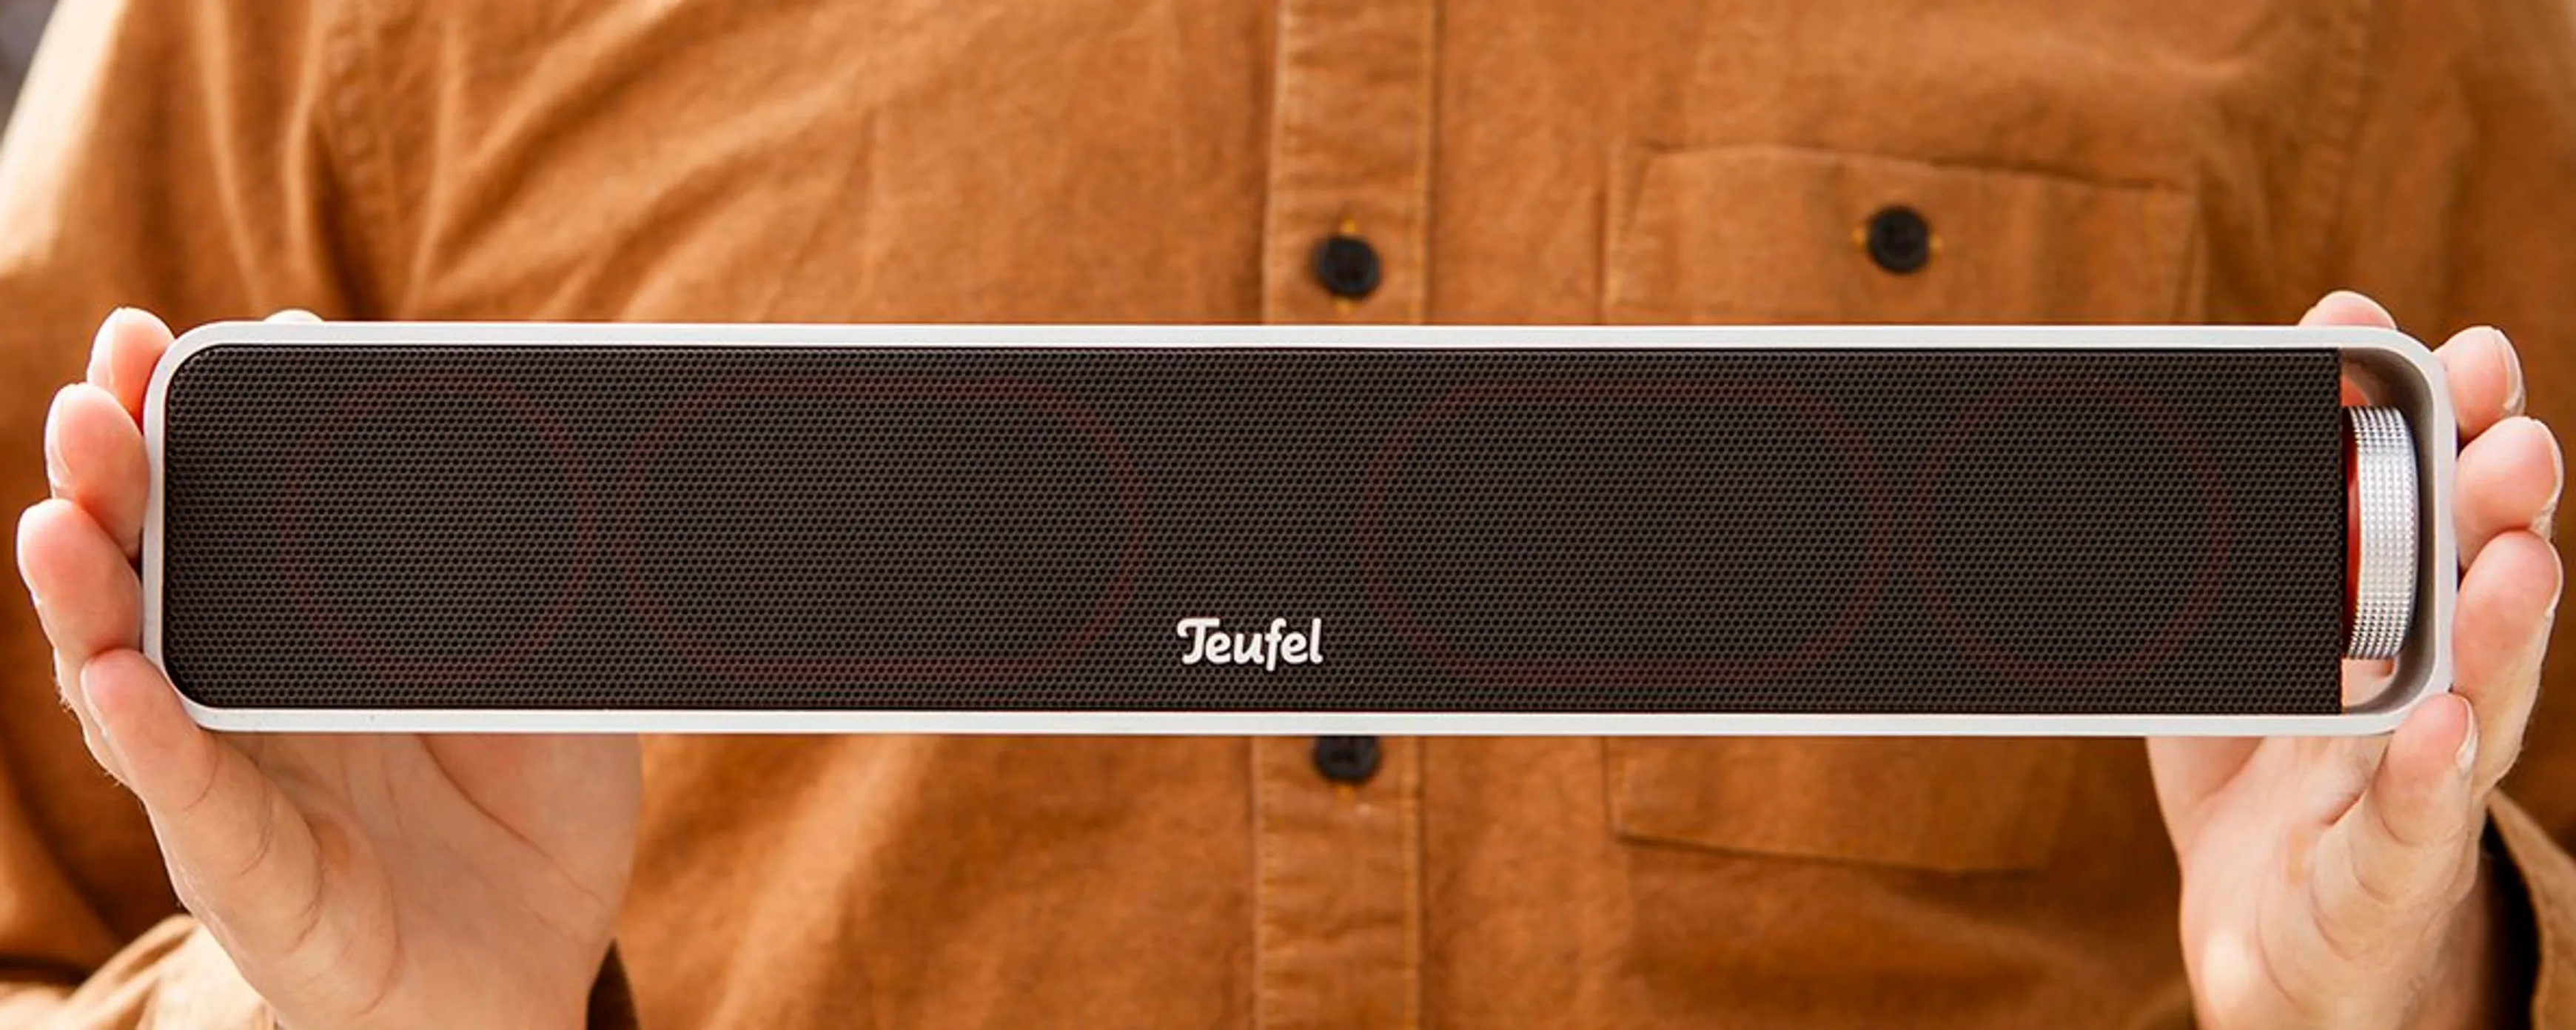 A person holding a Teufel Bamster speaker in front of themself